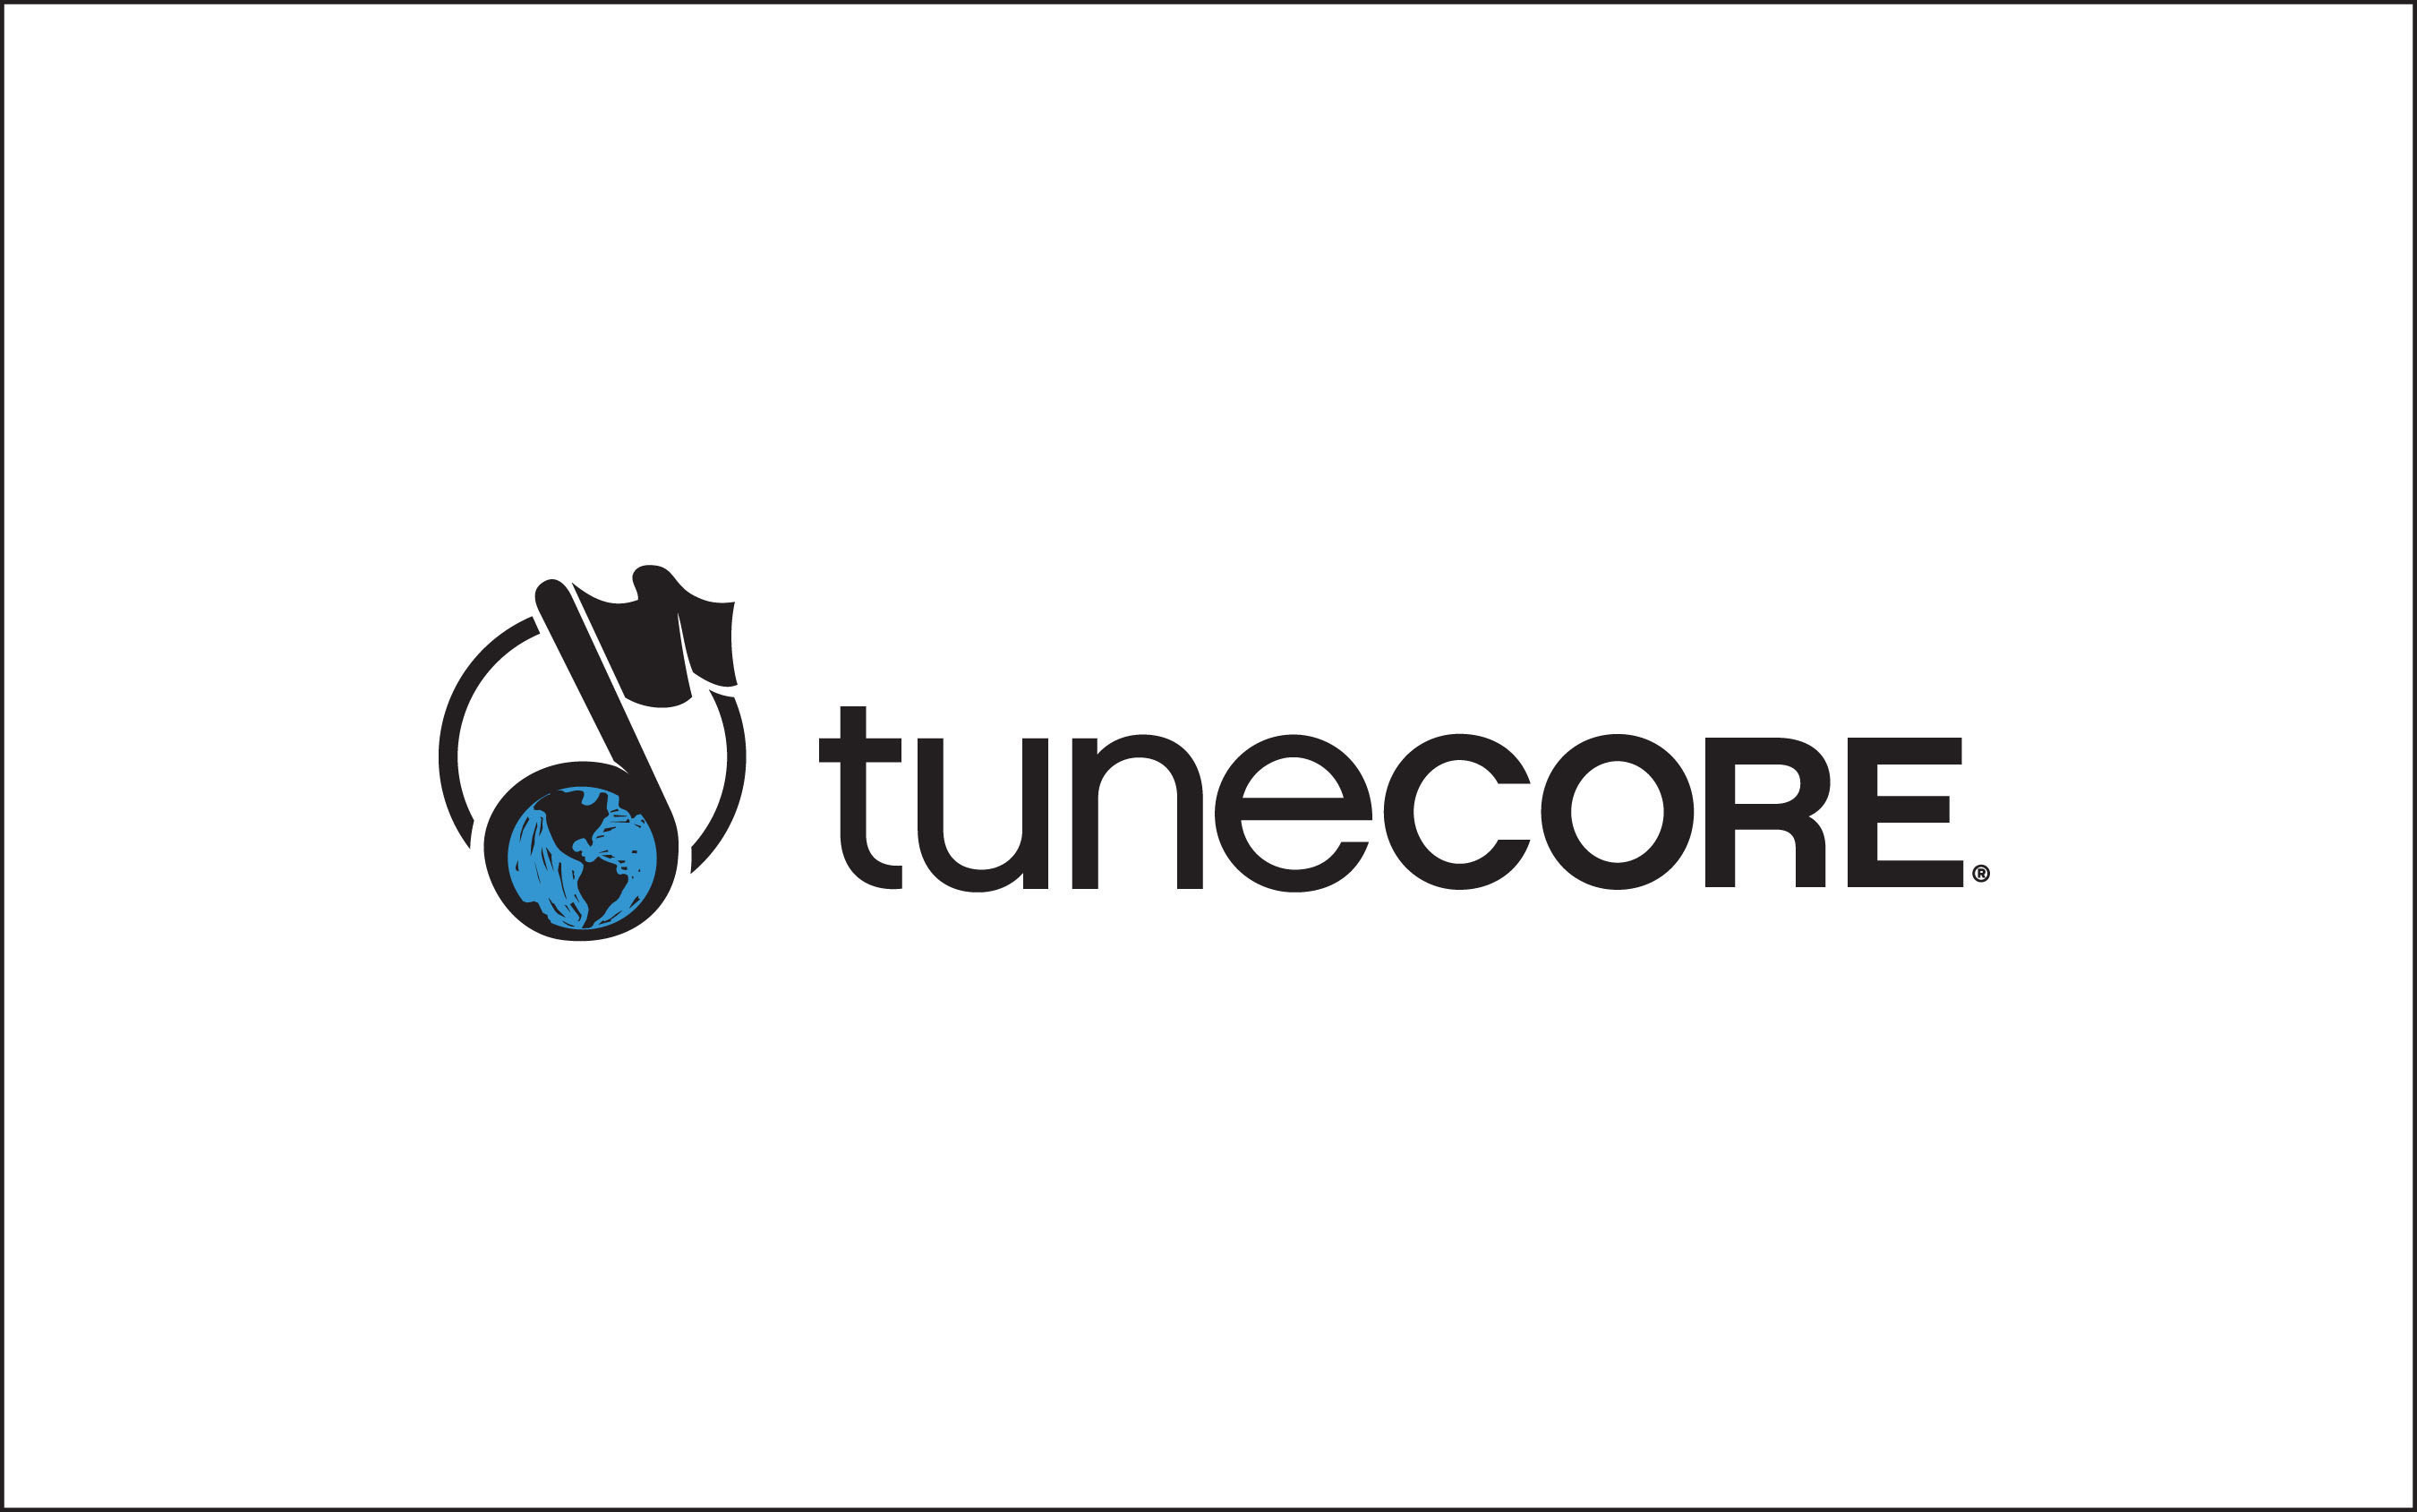 TuneCore brings more music to more people, while helping musicians and songwriters increase money-earning opportunities and take charge of their own careers. The company has one of the highest artist revenue-generating music catalogs in the world, earning TuneCore Artists $504 million on 12 billion streams and downloads since inception. TuneCore Music Distribution helps artists, labels and managers sell their music through iTunes, Amazon MP3, Spotify and other major download and streaming sites while retaining 100% of their sales revenue. TuneCore Music Publishing Administration assists songwriters by administering their compositions through licensing, registration and worldwide royalty collection, including YouTube monetization.(PRNewsFoto/TuneCore) (PRNewsFoto/TuneCore)